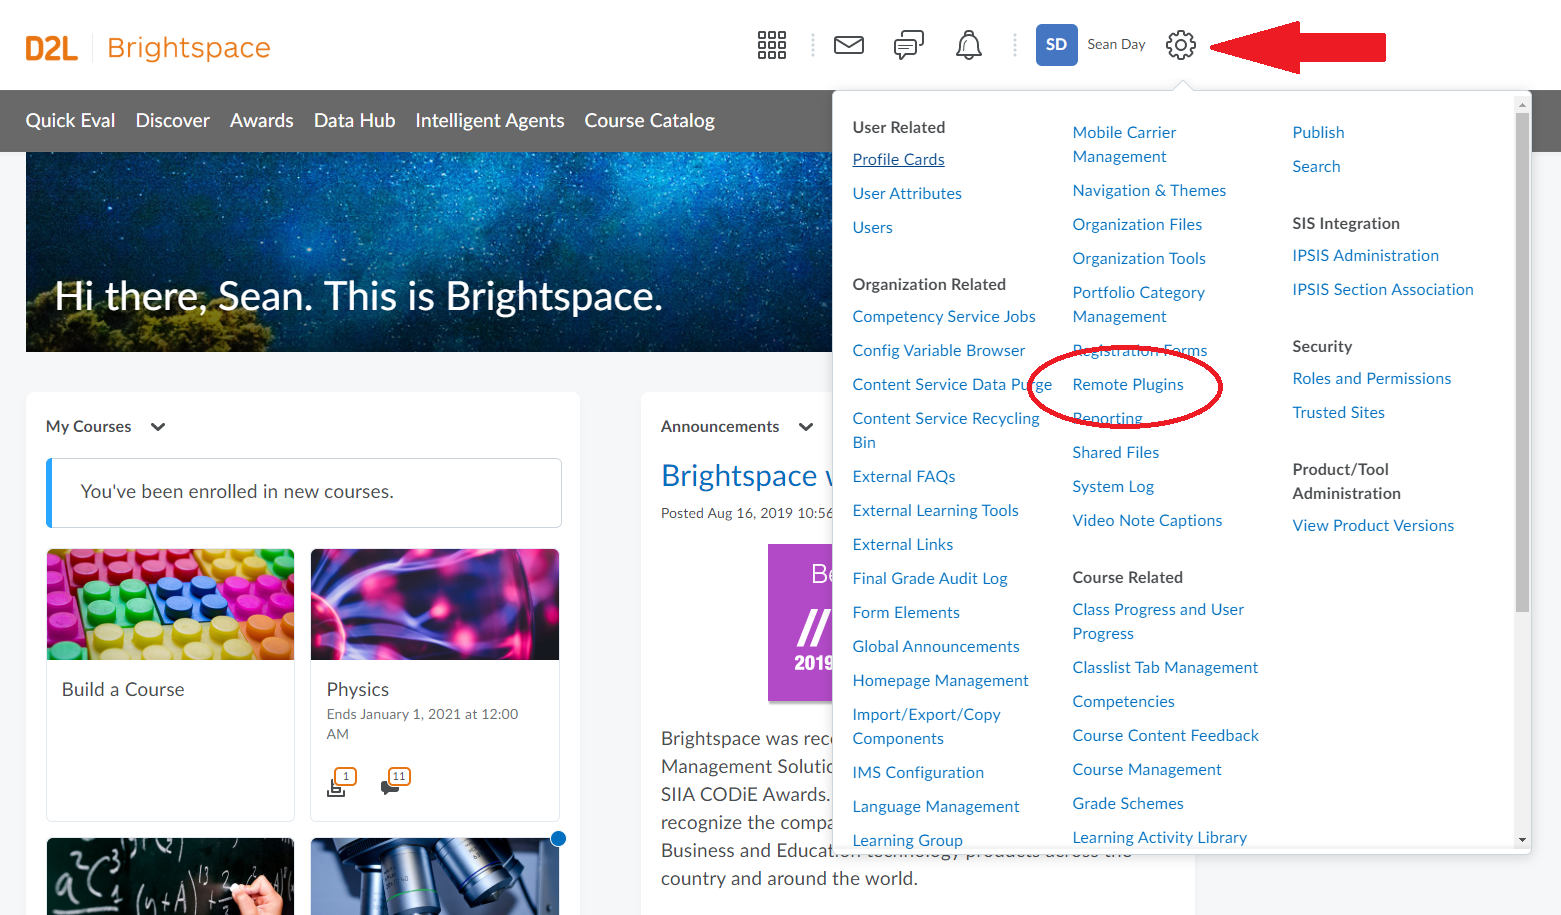 Brightspace options